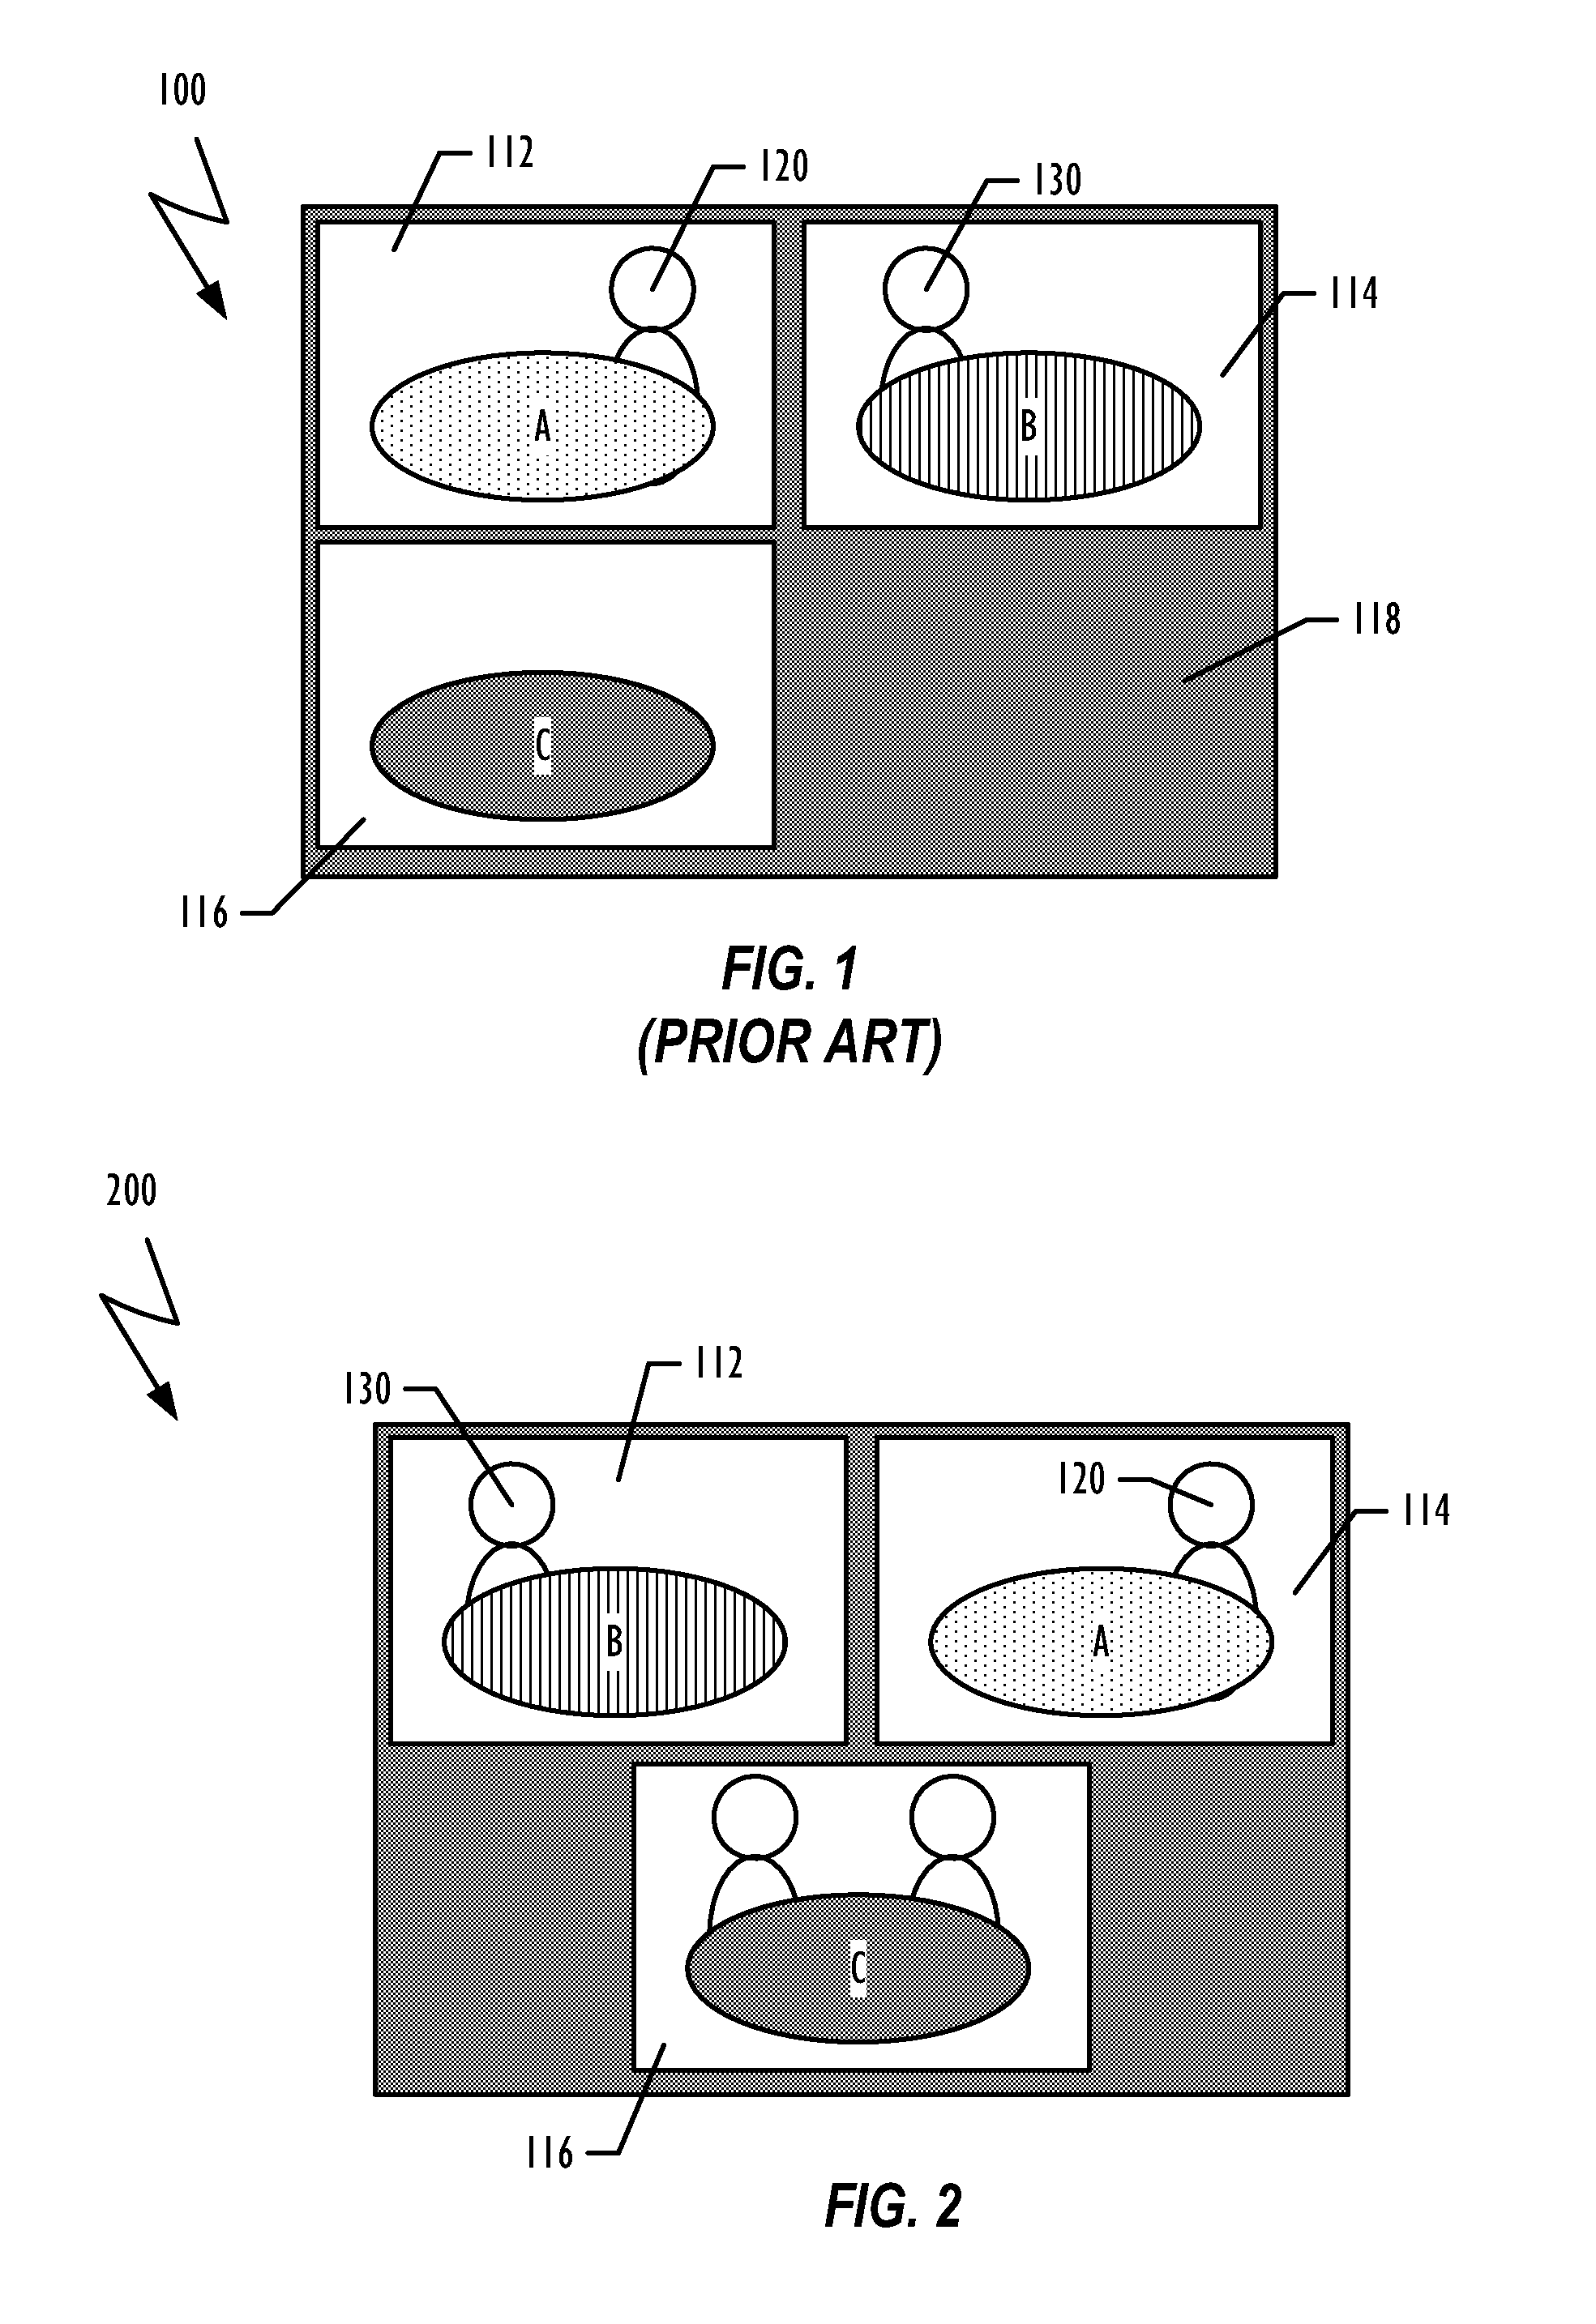 Method and System for Adapting A CP Layout According to Interaction Between Conferees